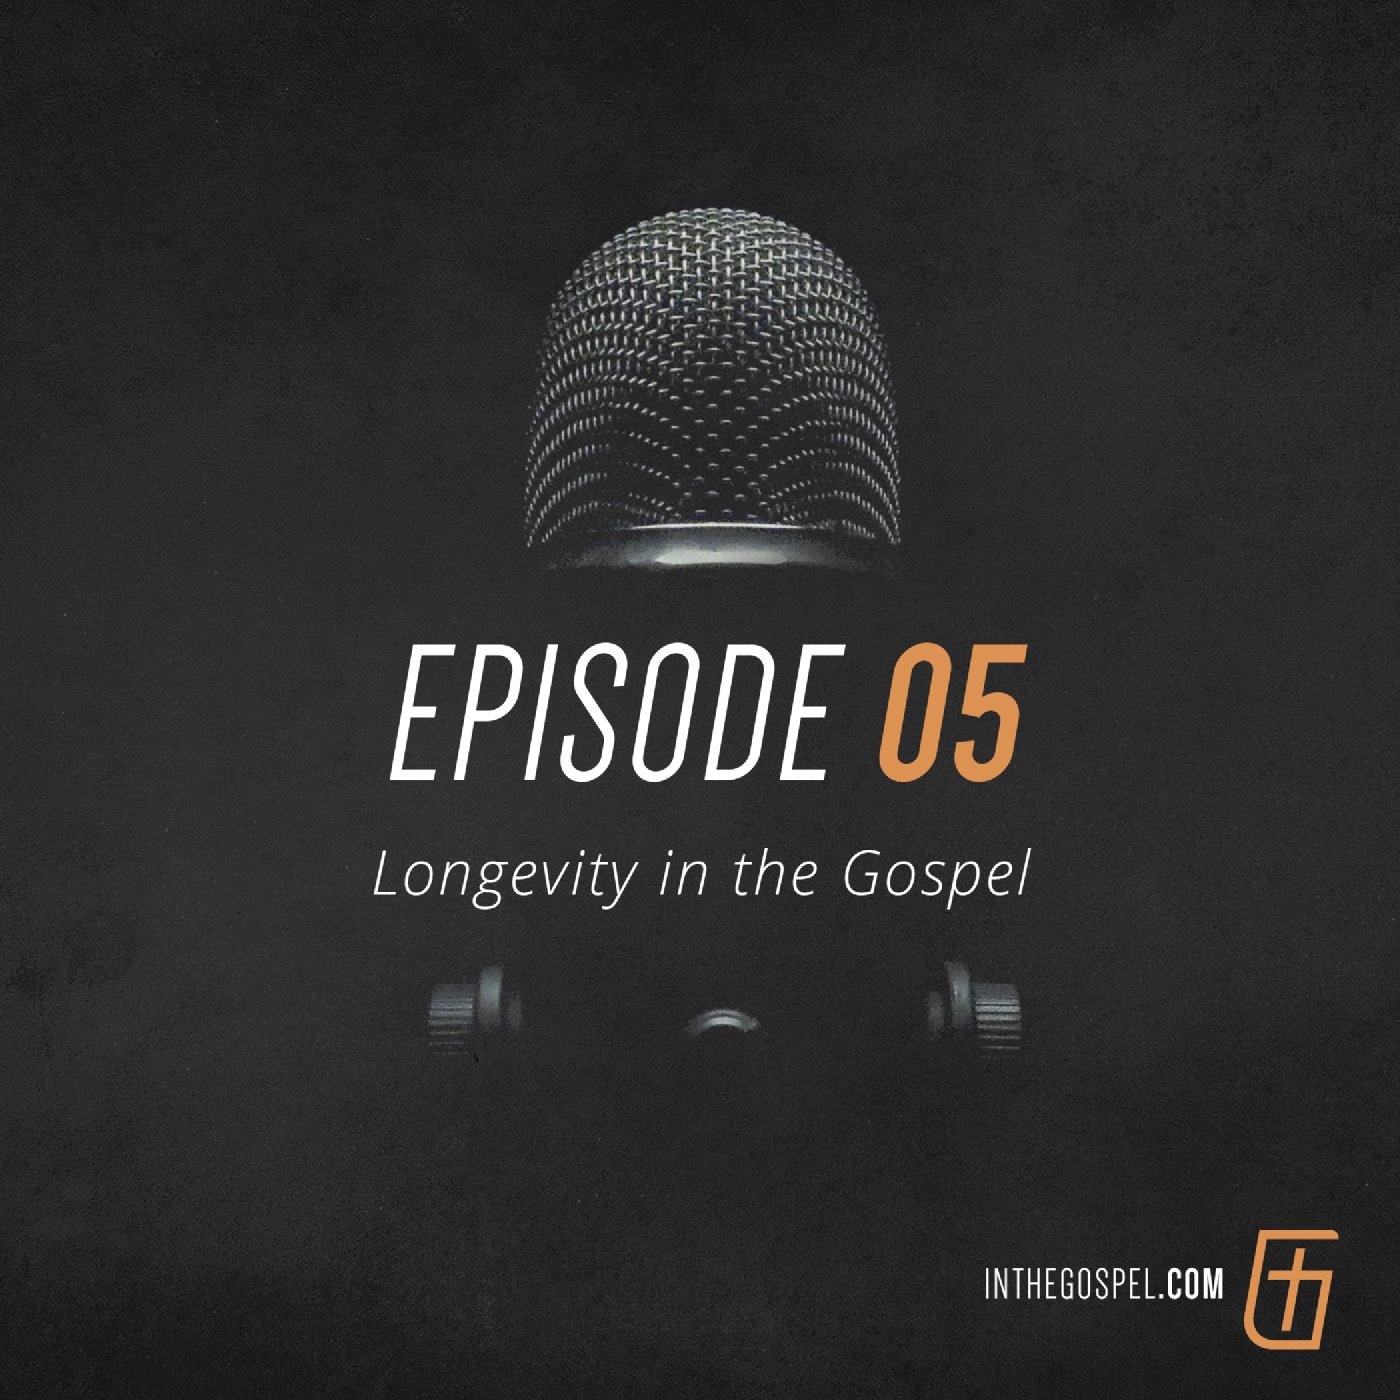 Episode 05: Longevity in the Gospel - Interview with Dr. Don Sisk